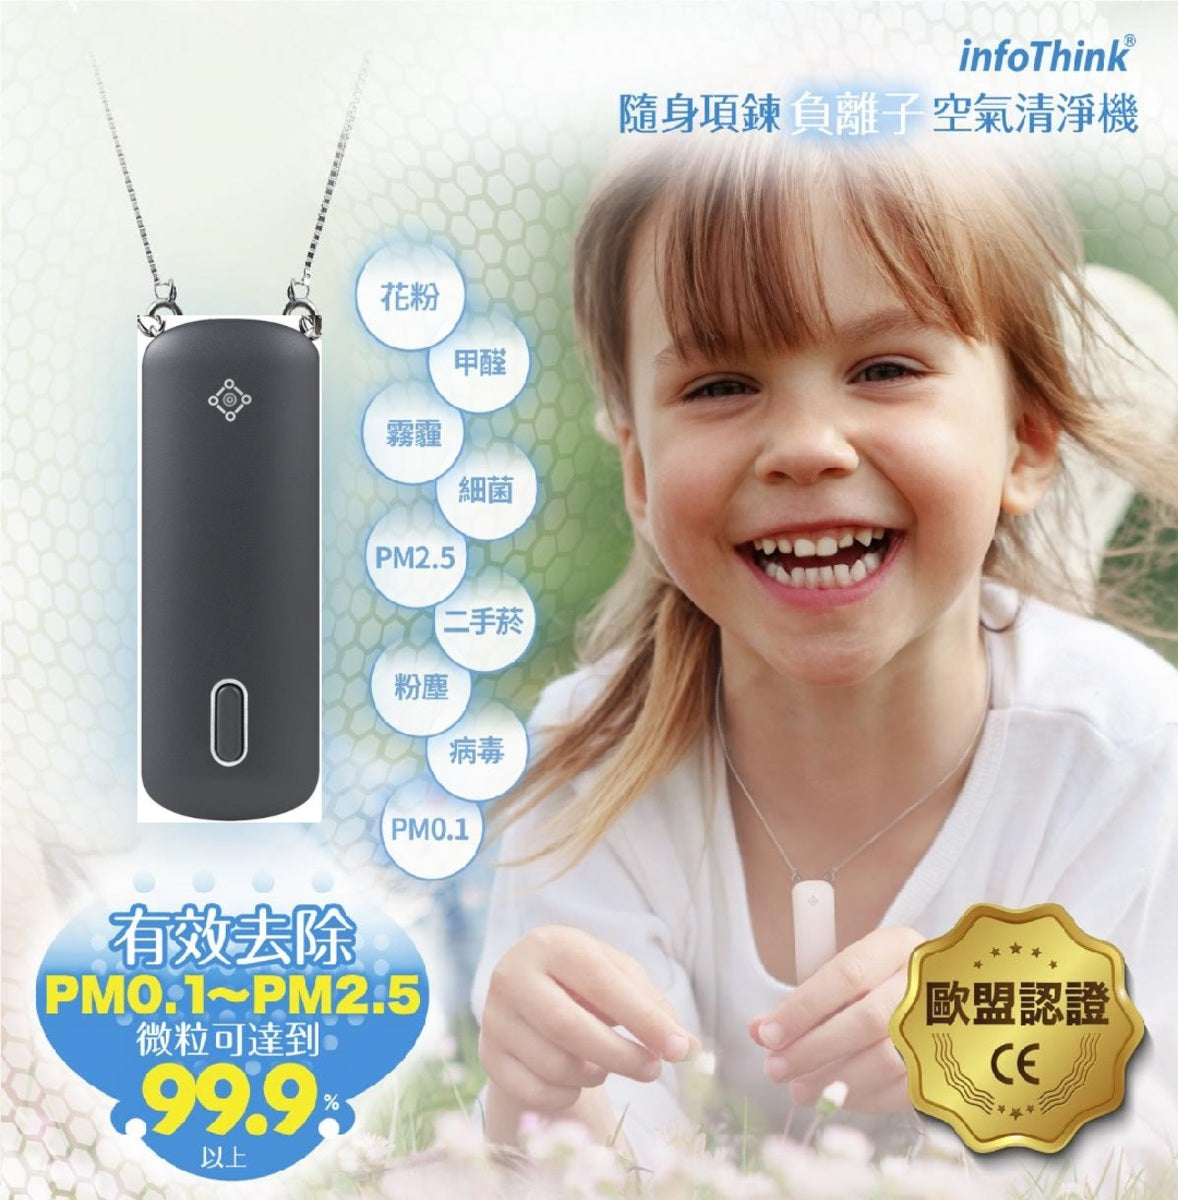 Xunxiang Technology - iAnion-100 Portable Necklace Negative Ion Air Purifier - Black [Made in Taiwan. Hong Kong licensed goods]